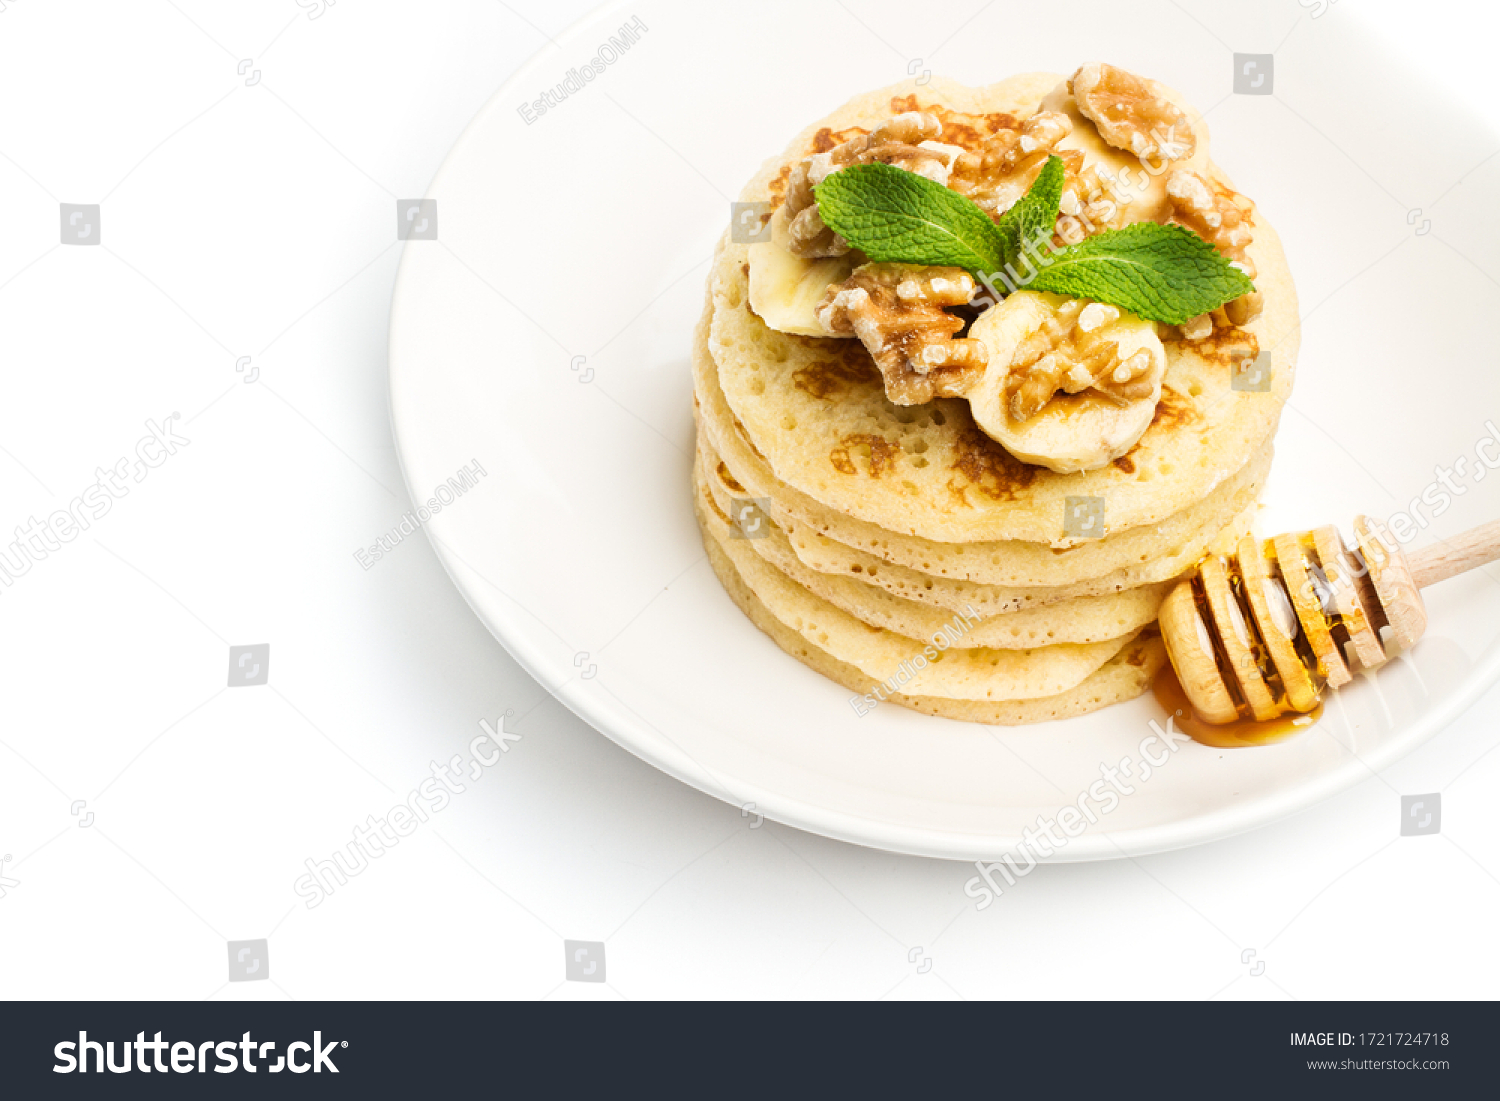 Pancakes with banana slices on a white plate #1721724718